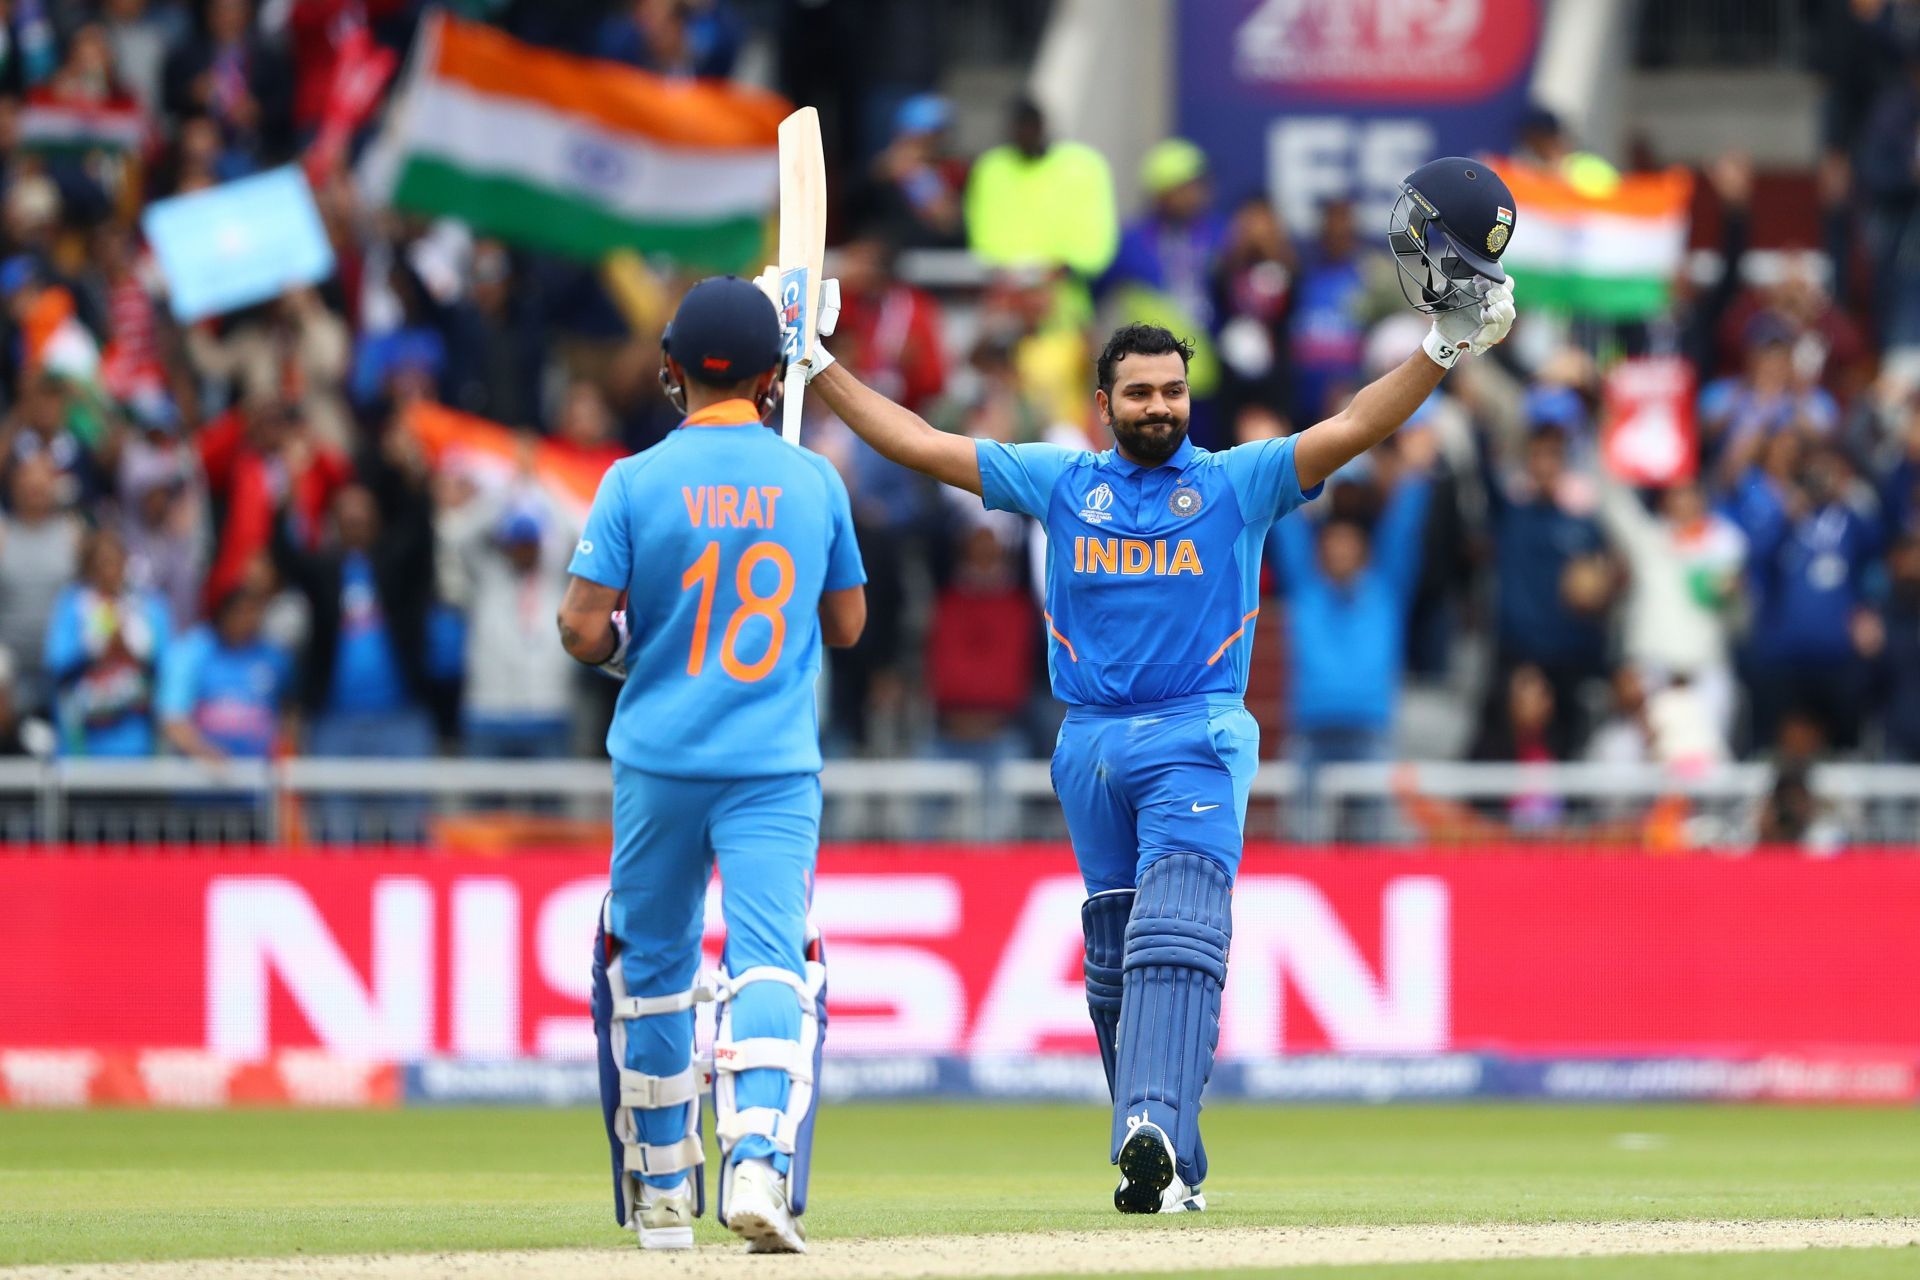 Rohit Sharma and Kohli have not played an ODI match together since March 2021